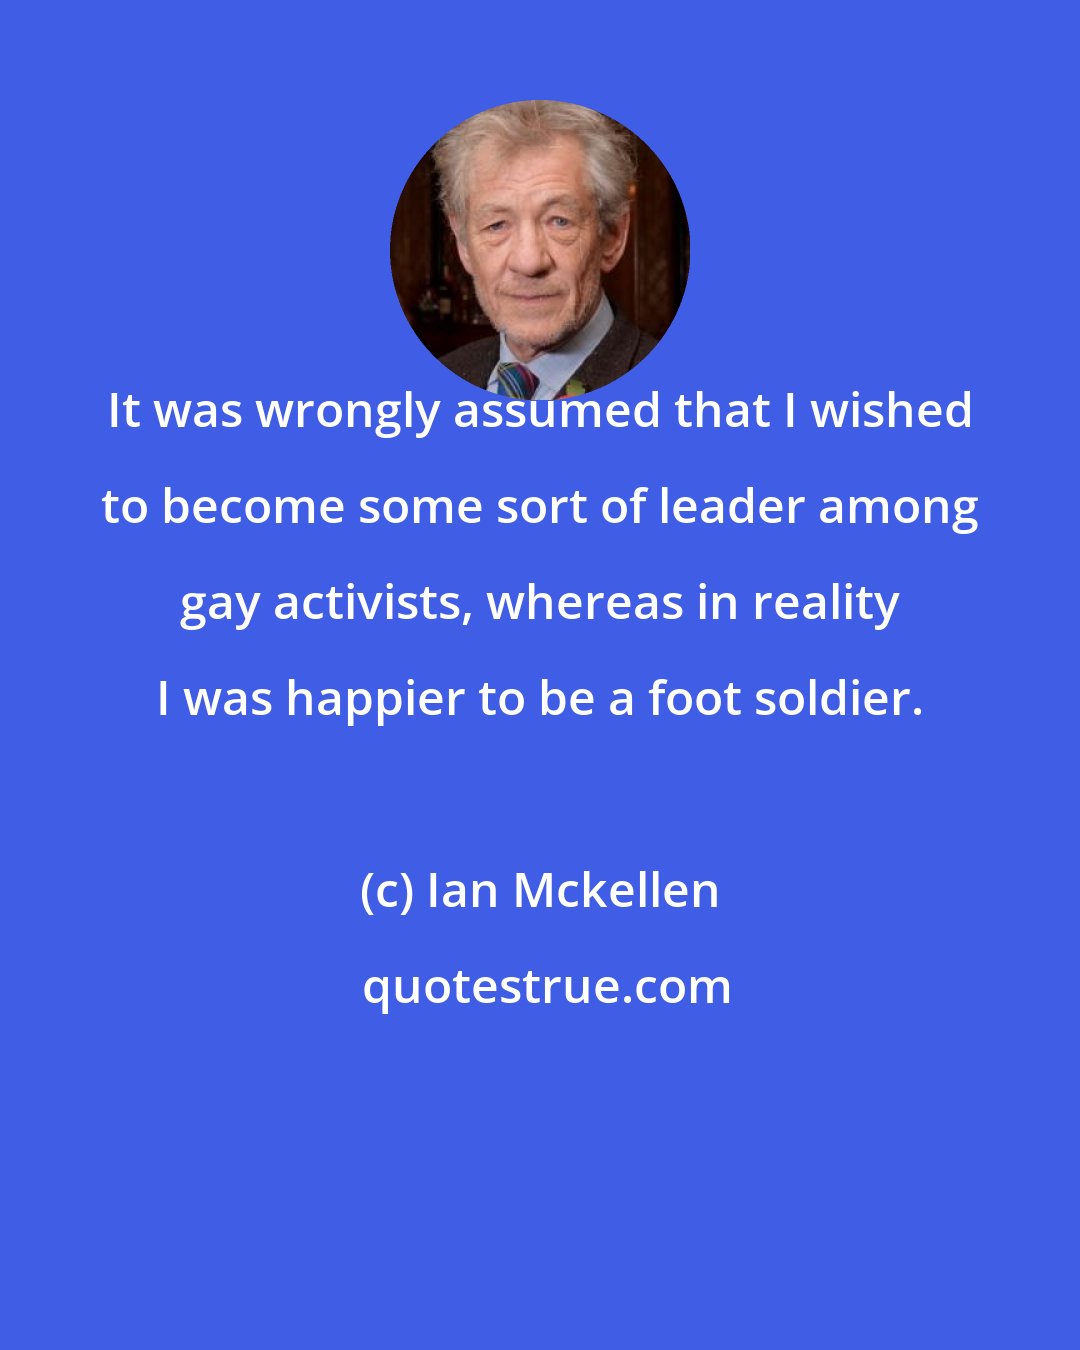 Ian Mckellen: It was wrongly assumed that I wished to become some sort of leader among gay activists, whereas in reality I was happier to be a foot soldier.